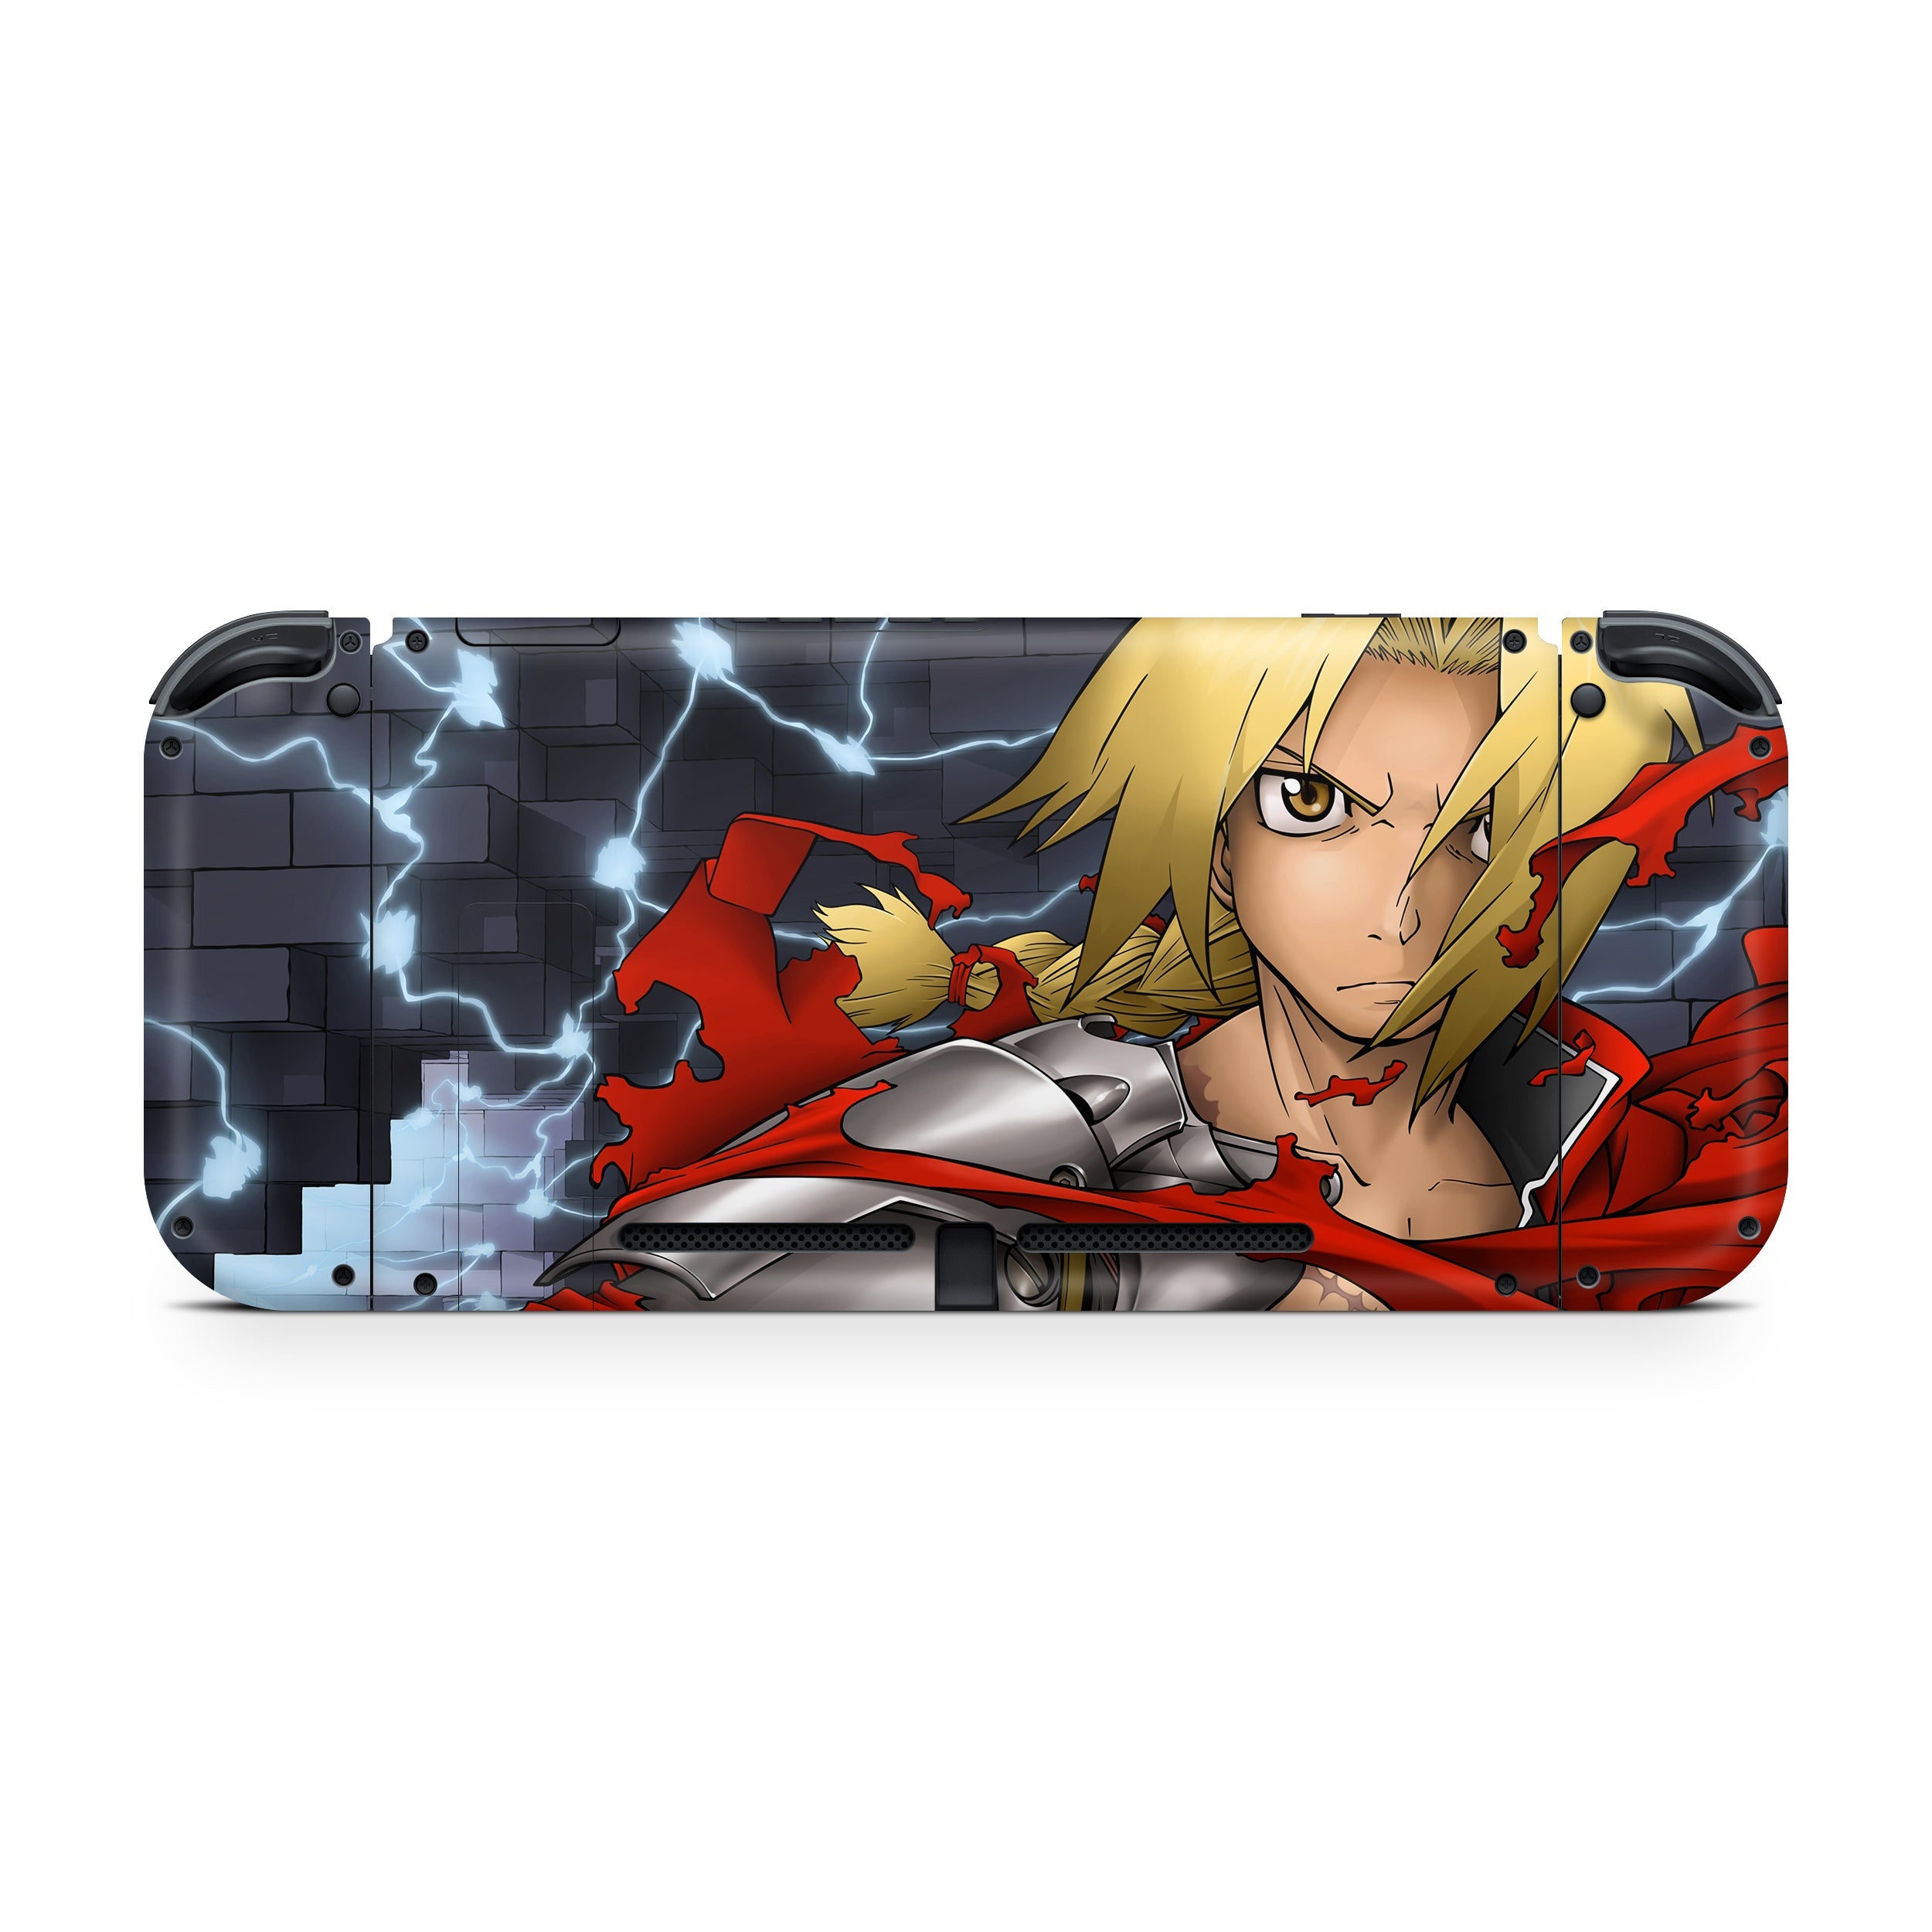 A video game skin featuring a Fullmetal Alchemist Edward Elric design for the Nintendo Switch.